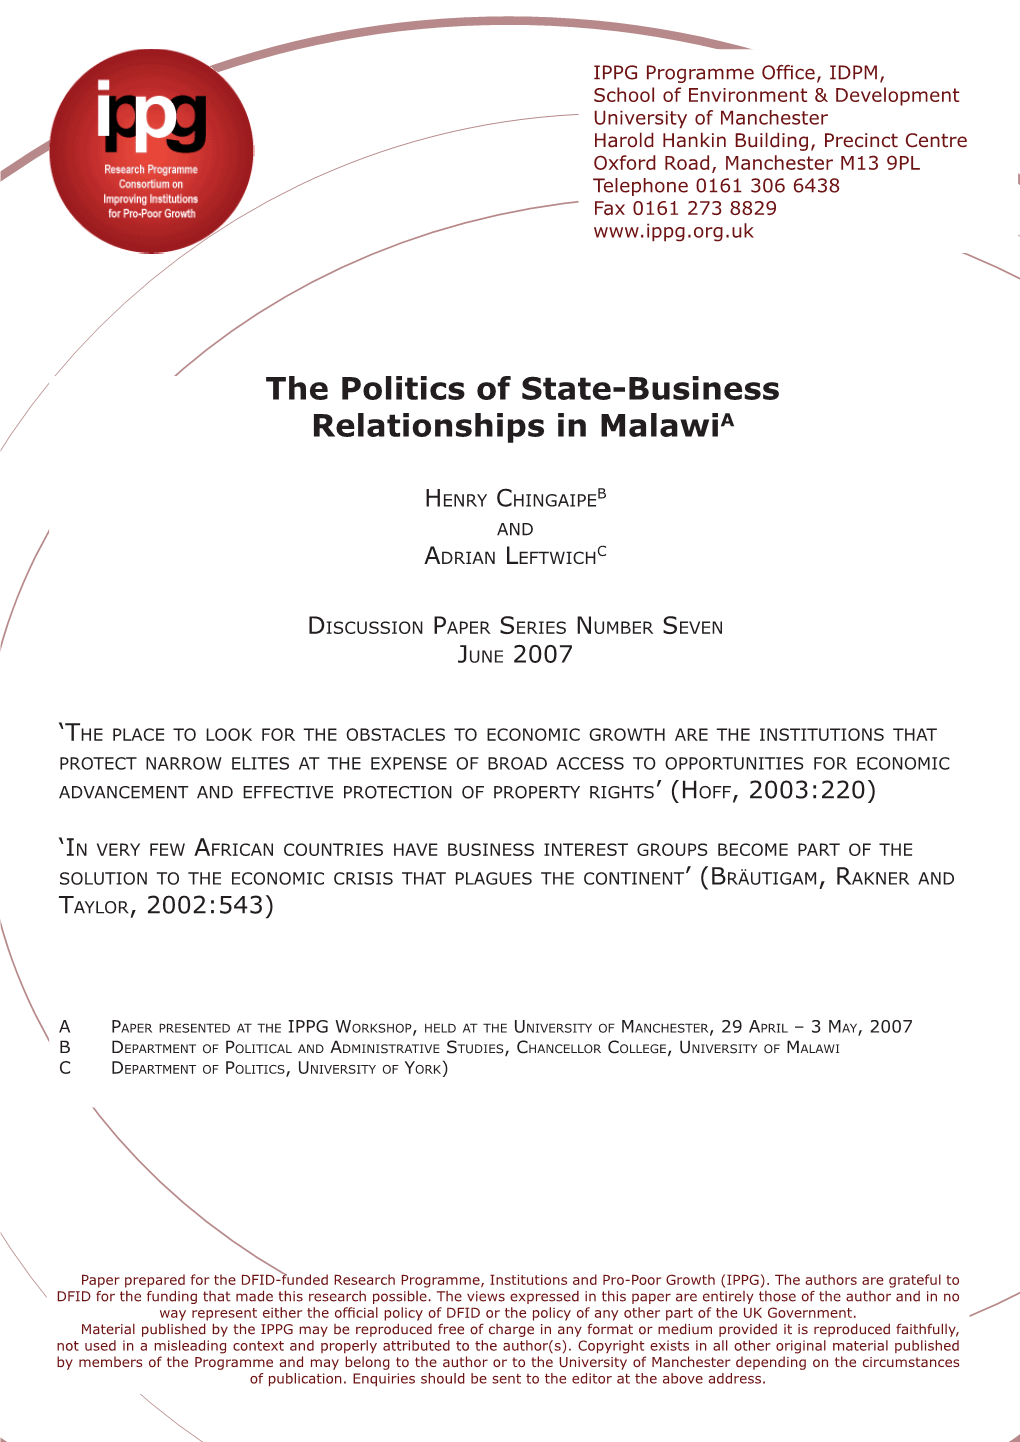 The Politics of State-Business Relationships in Malawia